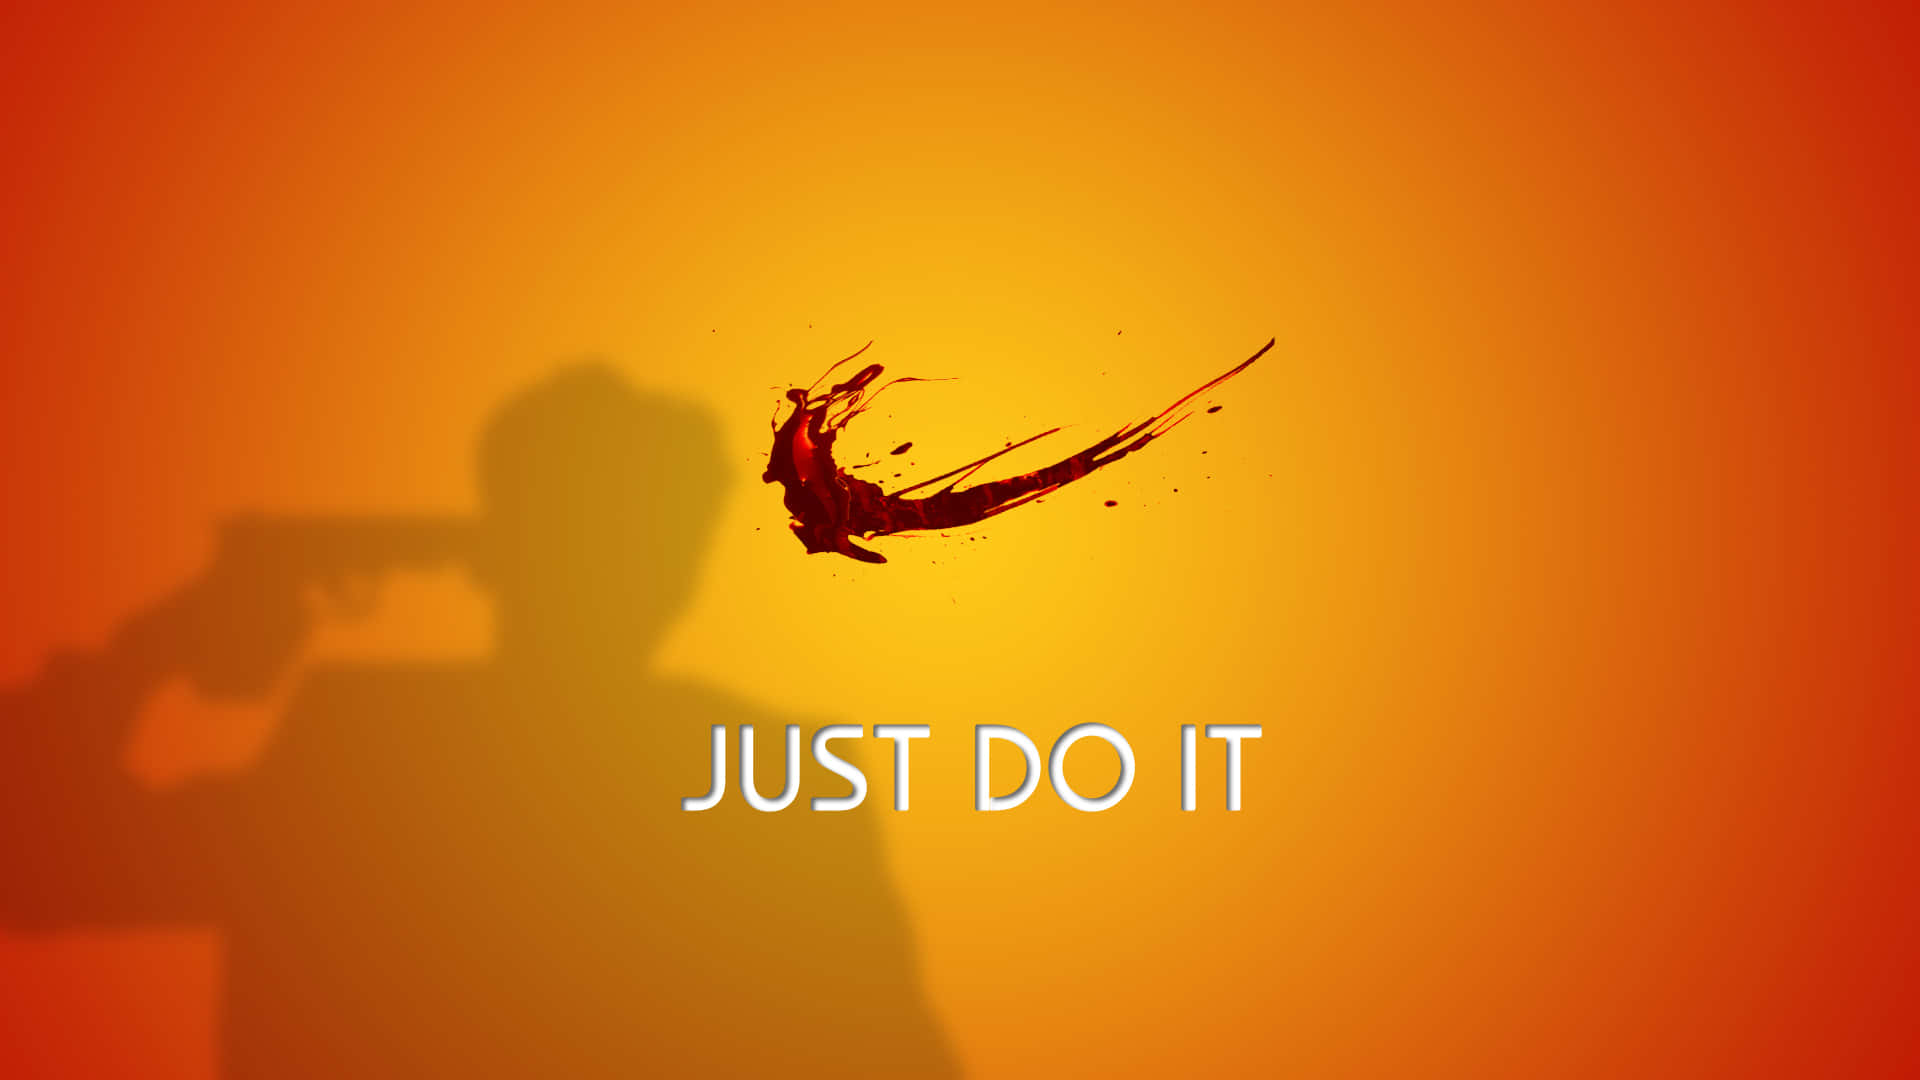 Scary Just Do It Wallpaper